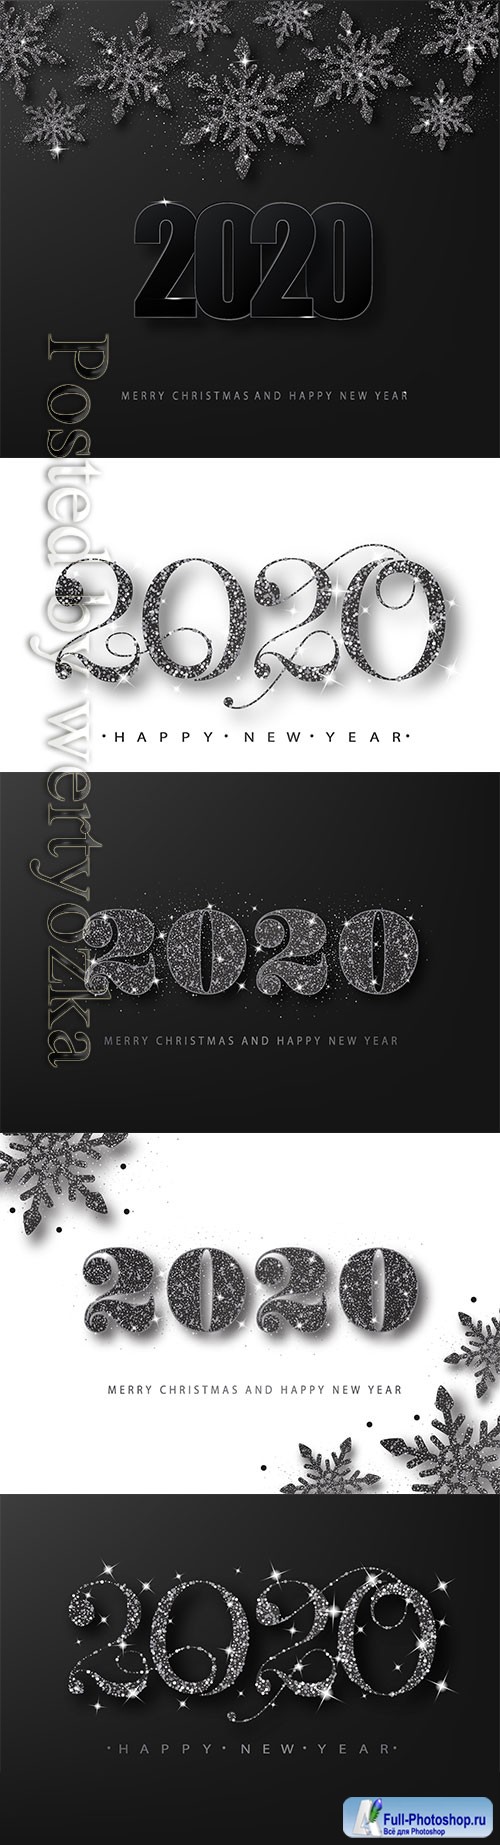 2020 Merry Chistmas and Happy New Year vector illustration # 16